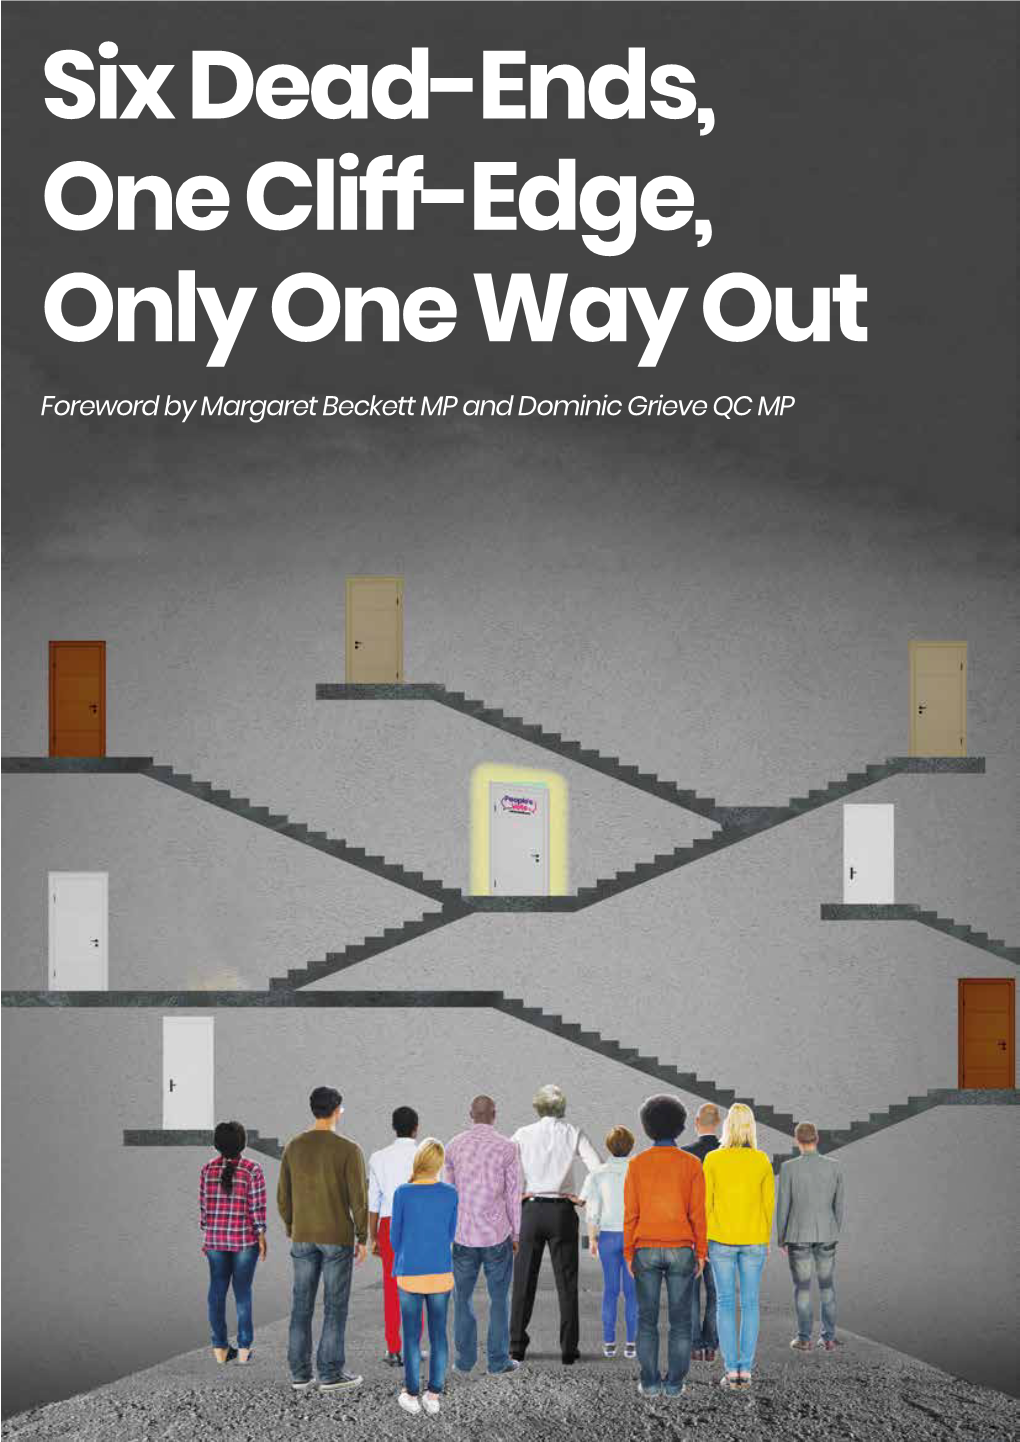 Six Dead-Ends, One Cliff-Edge, Only One Way out Foreword by Margaret Beckett MP and Dominic Grieve QC MP Contents